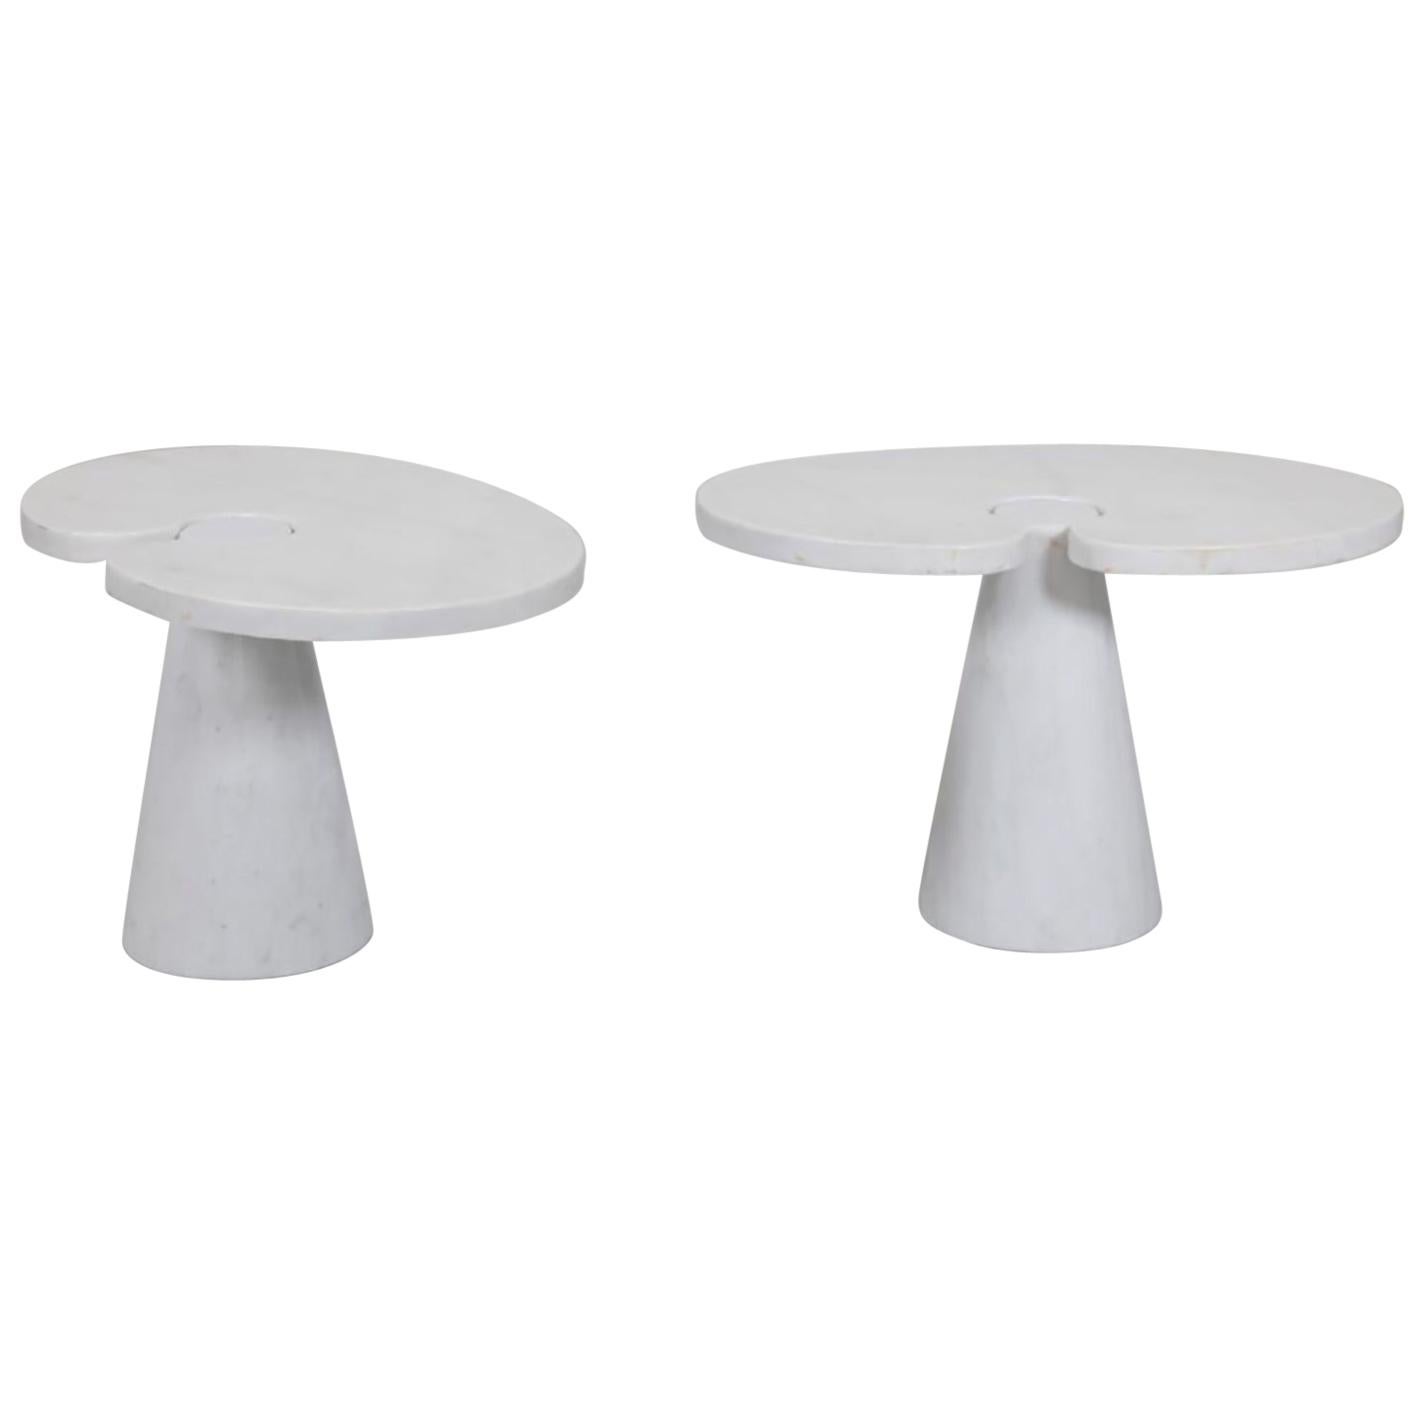 Pair of Angelo Mangiarotti Carrara Side Tables for Skipper Sold Individually